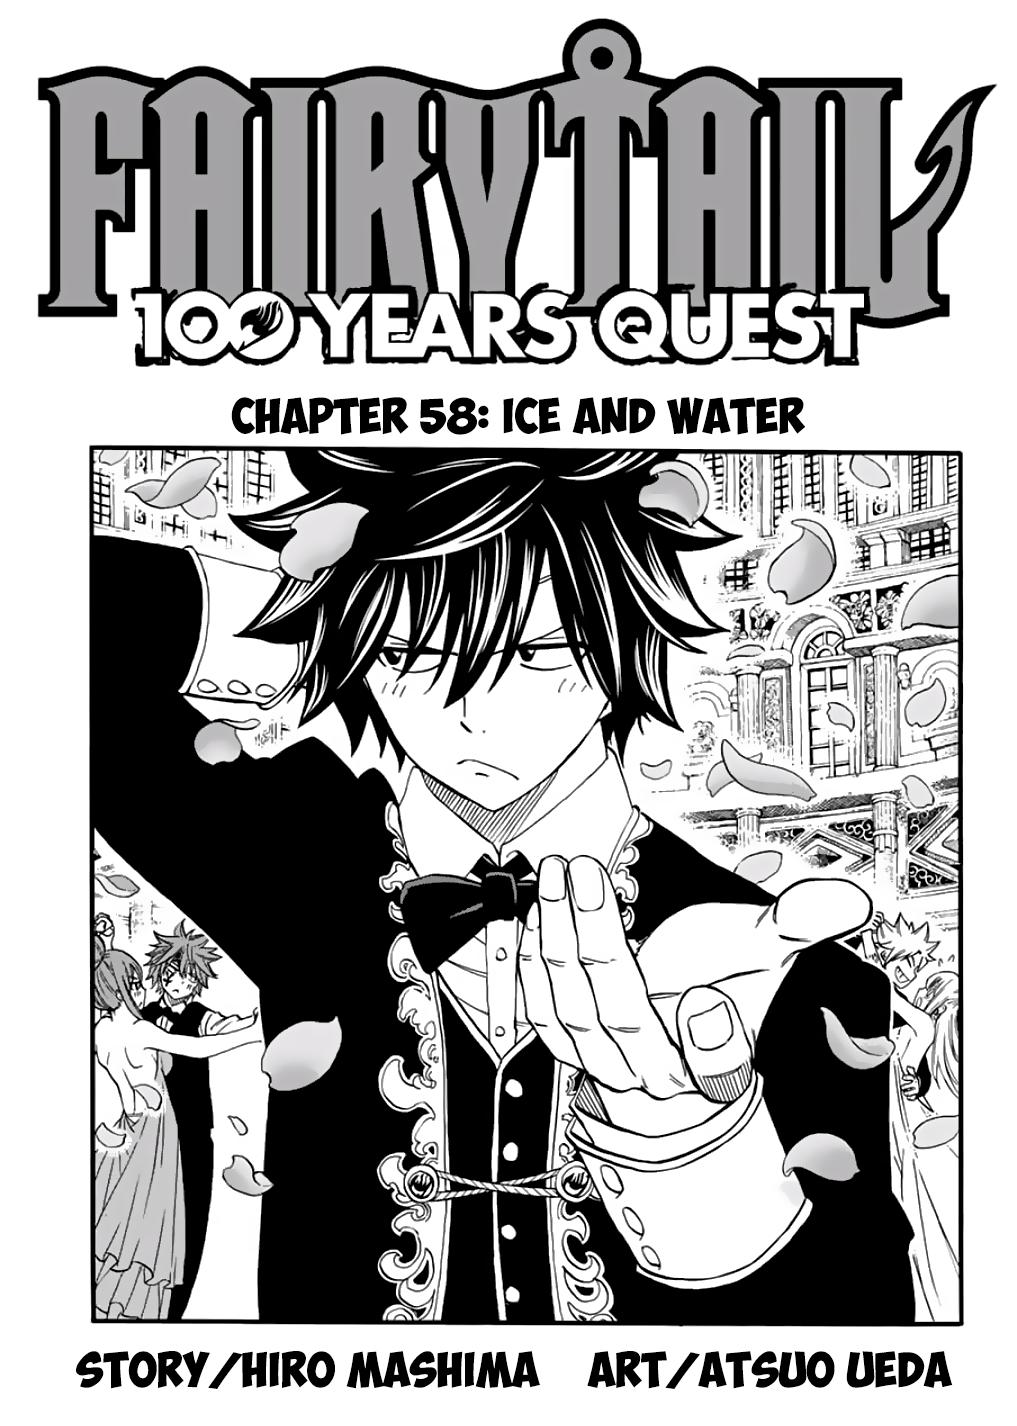 Fairy tail 100 year quest manga online